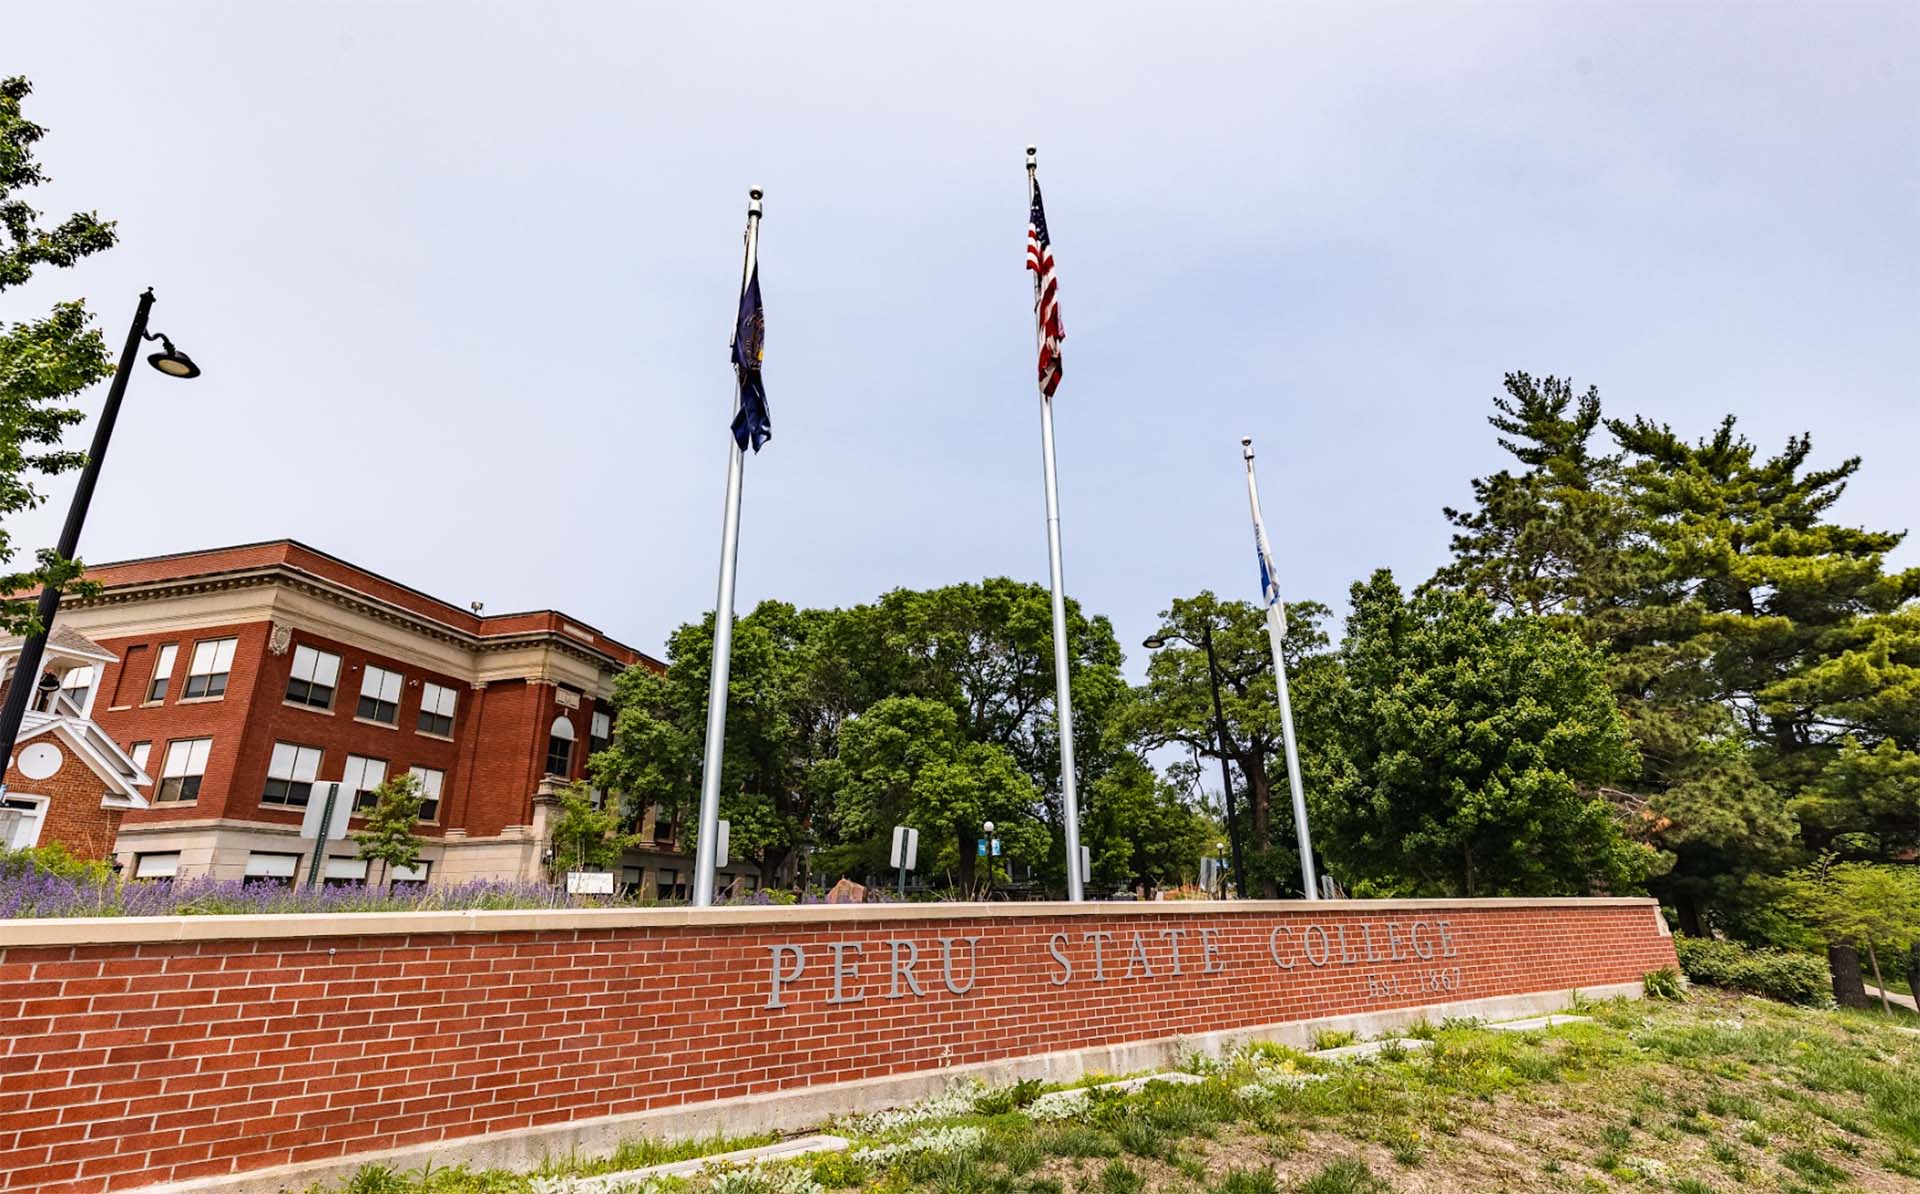 a sign for peru state college with flagpoles and flags